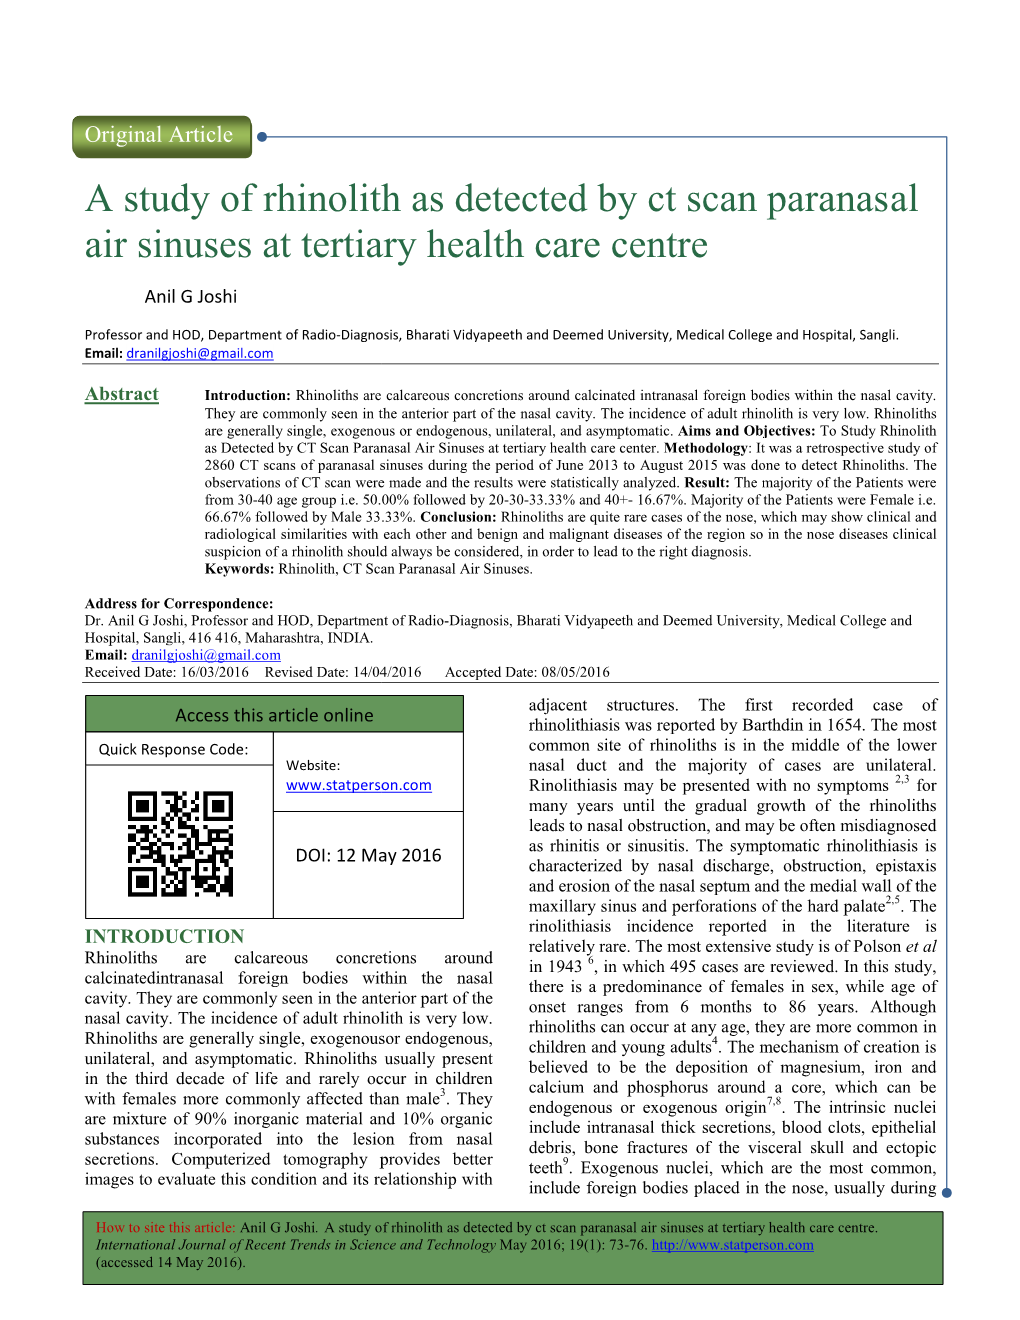 A Study of Rhinolith As Detected Air Sinuses at Tertiary Health Care Y Of